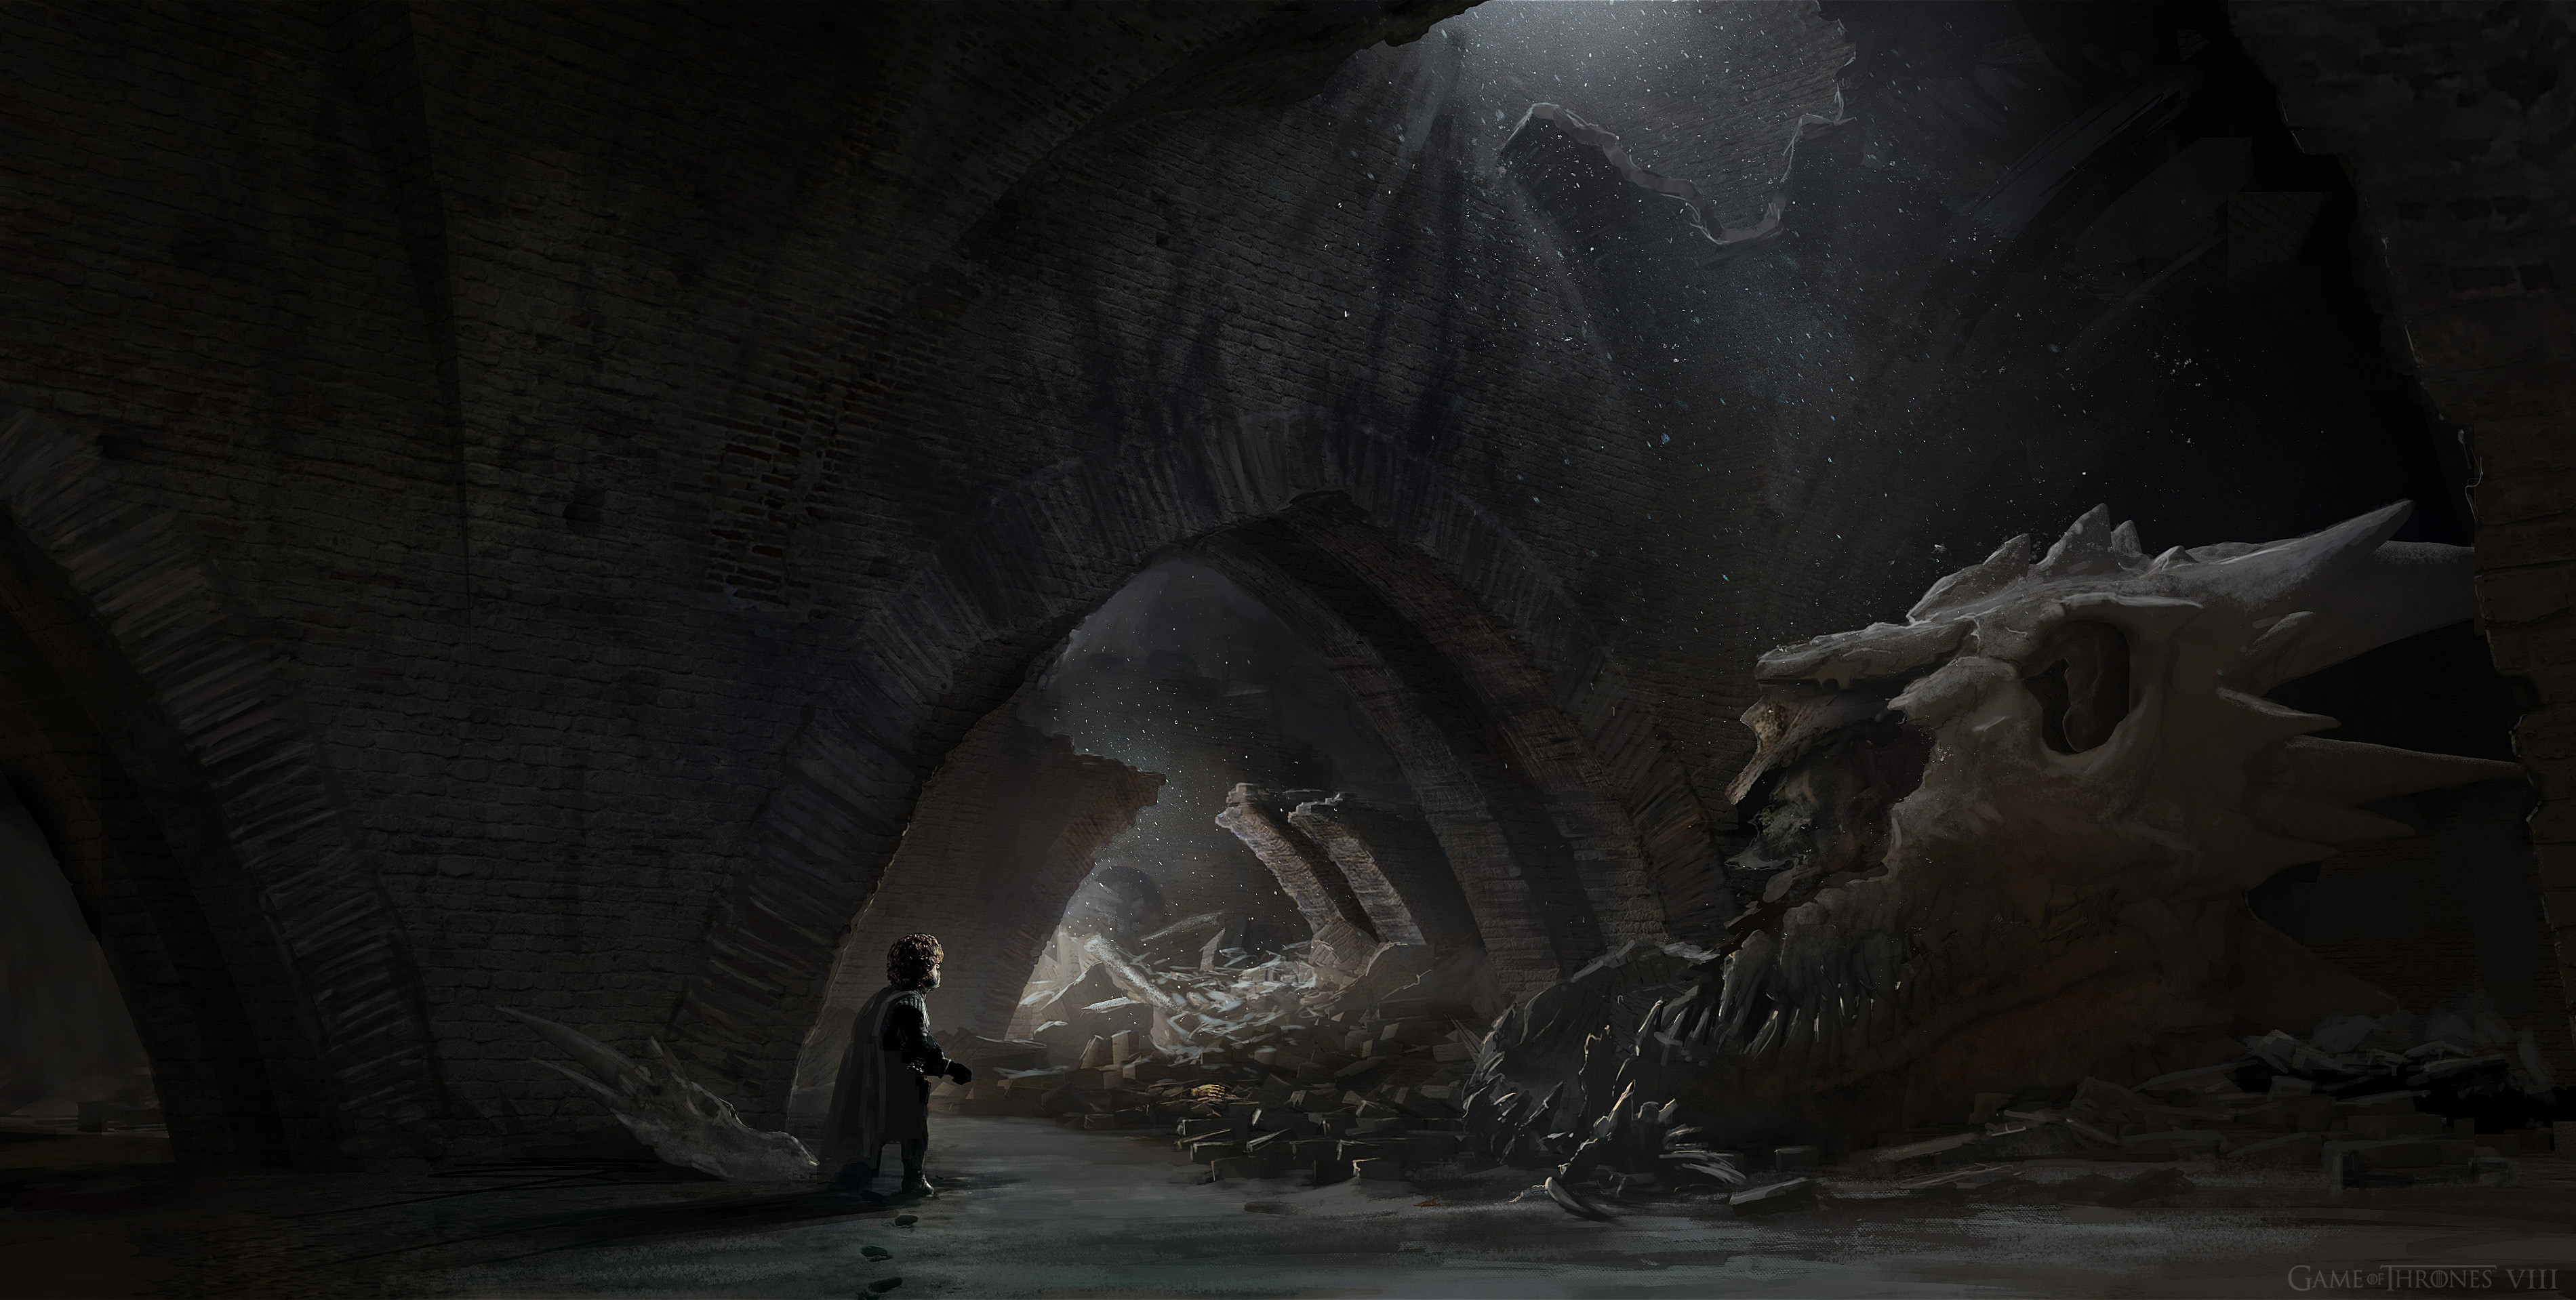 Tyrion reaches the Skull room and spots something in the rubble, final approved version